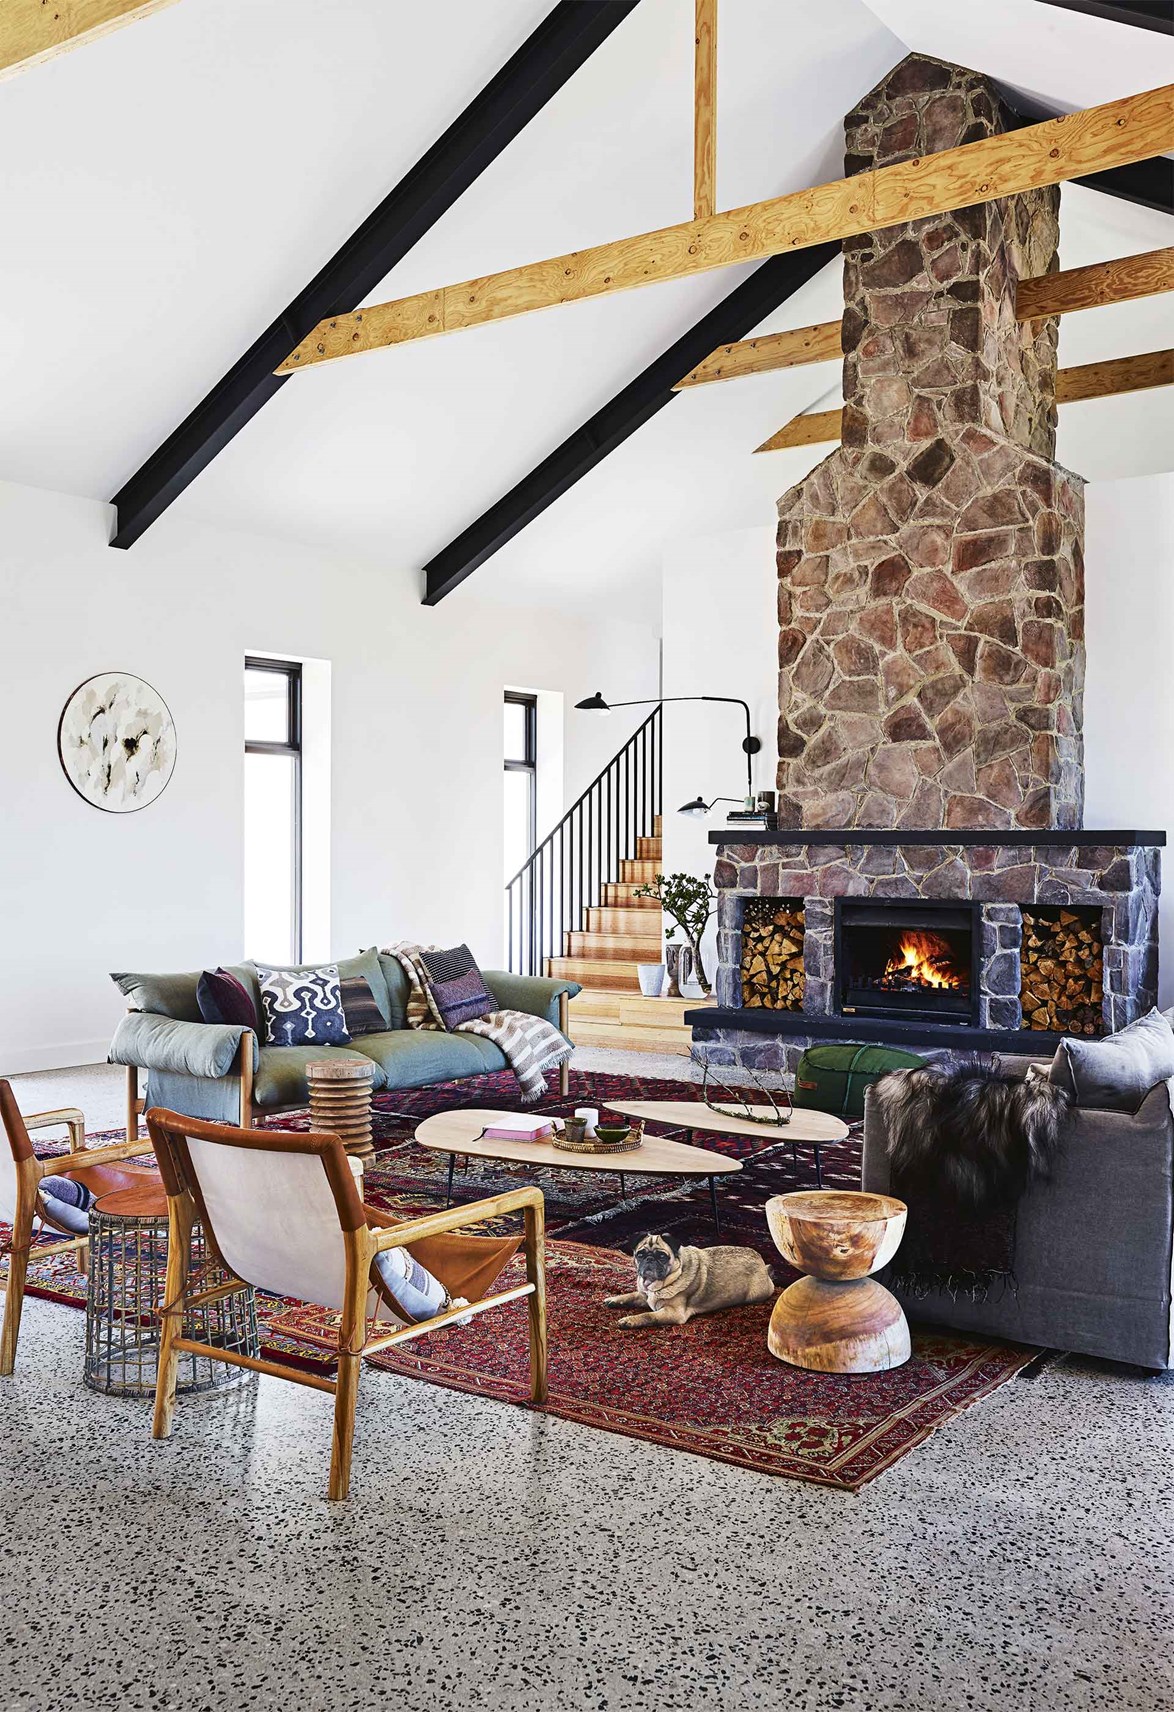 Designed as a space to relax with family and friends, this newly built fireplace blends rustic random stacked stone with exposed beams and a narrow mantle. The colour of the stone takes on a modern look as it cleverly ties to contemporary details of black beams, balustrading and polished concrete floors.